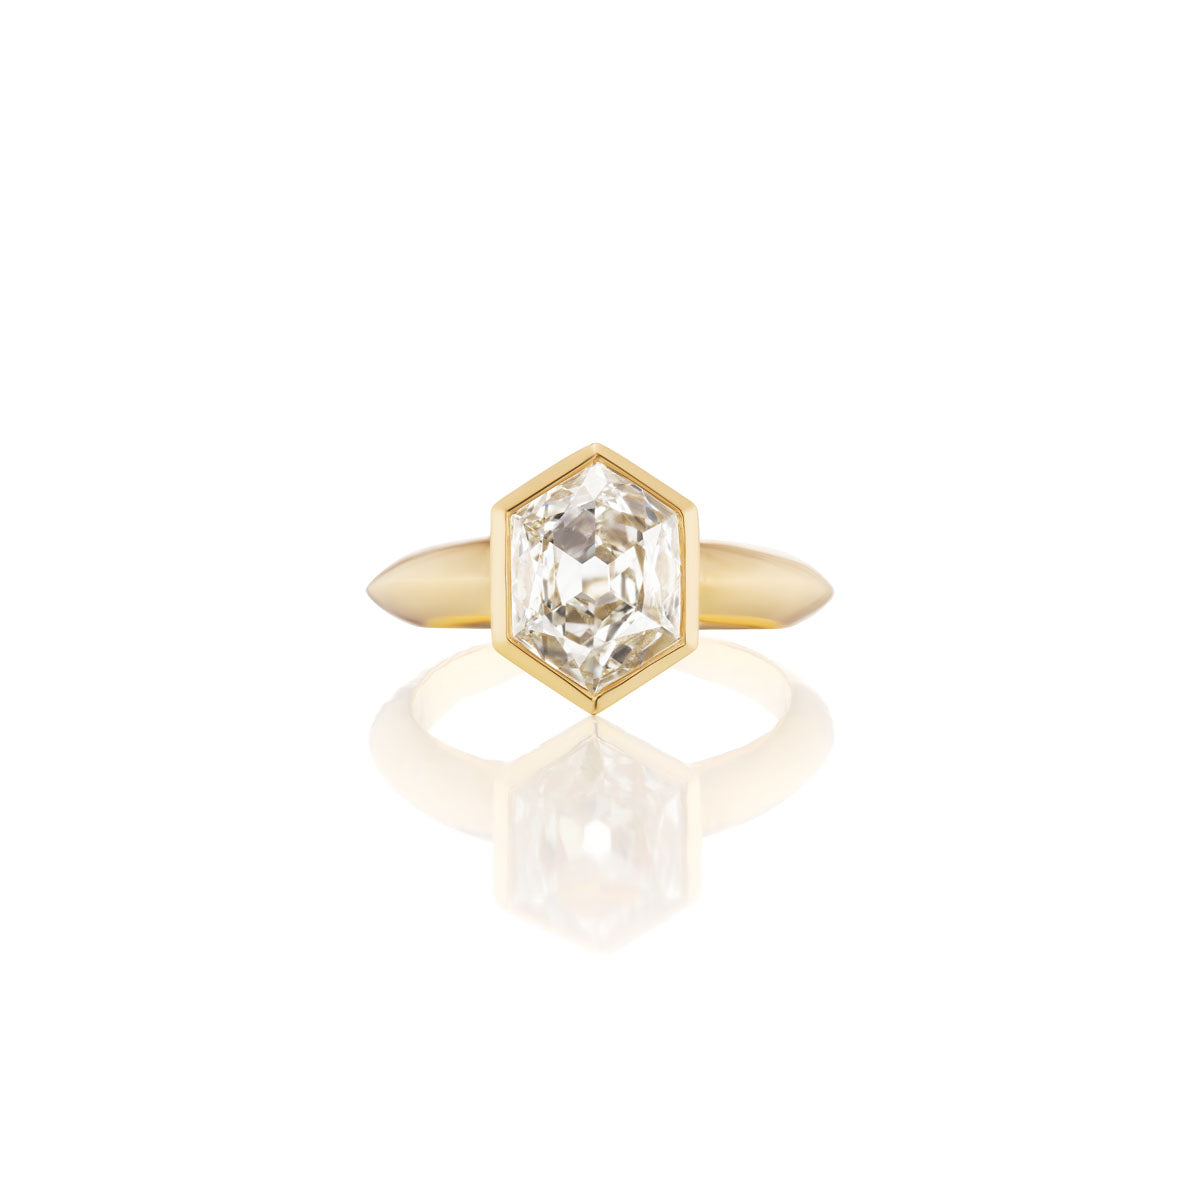 THE DIAMOND HEX SOLITAIRE RING